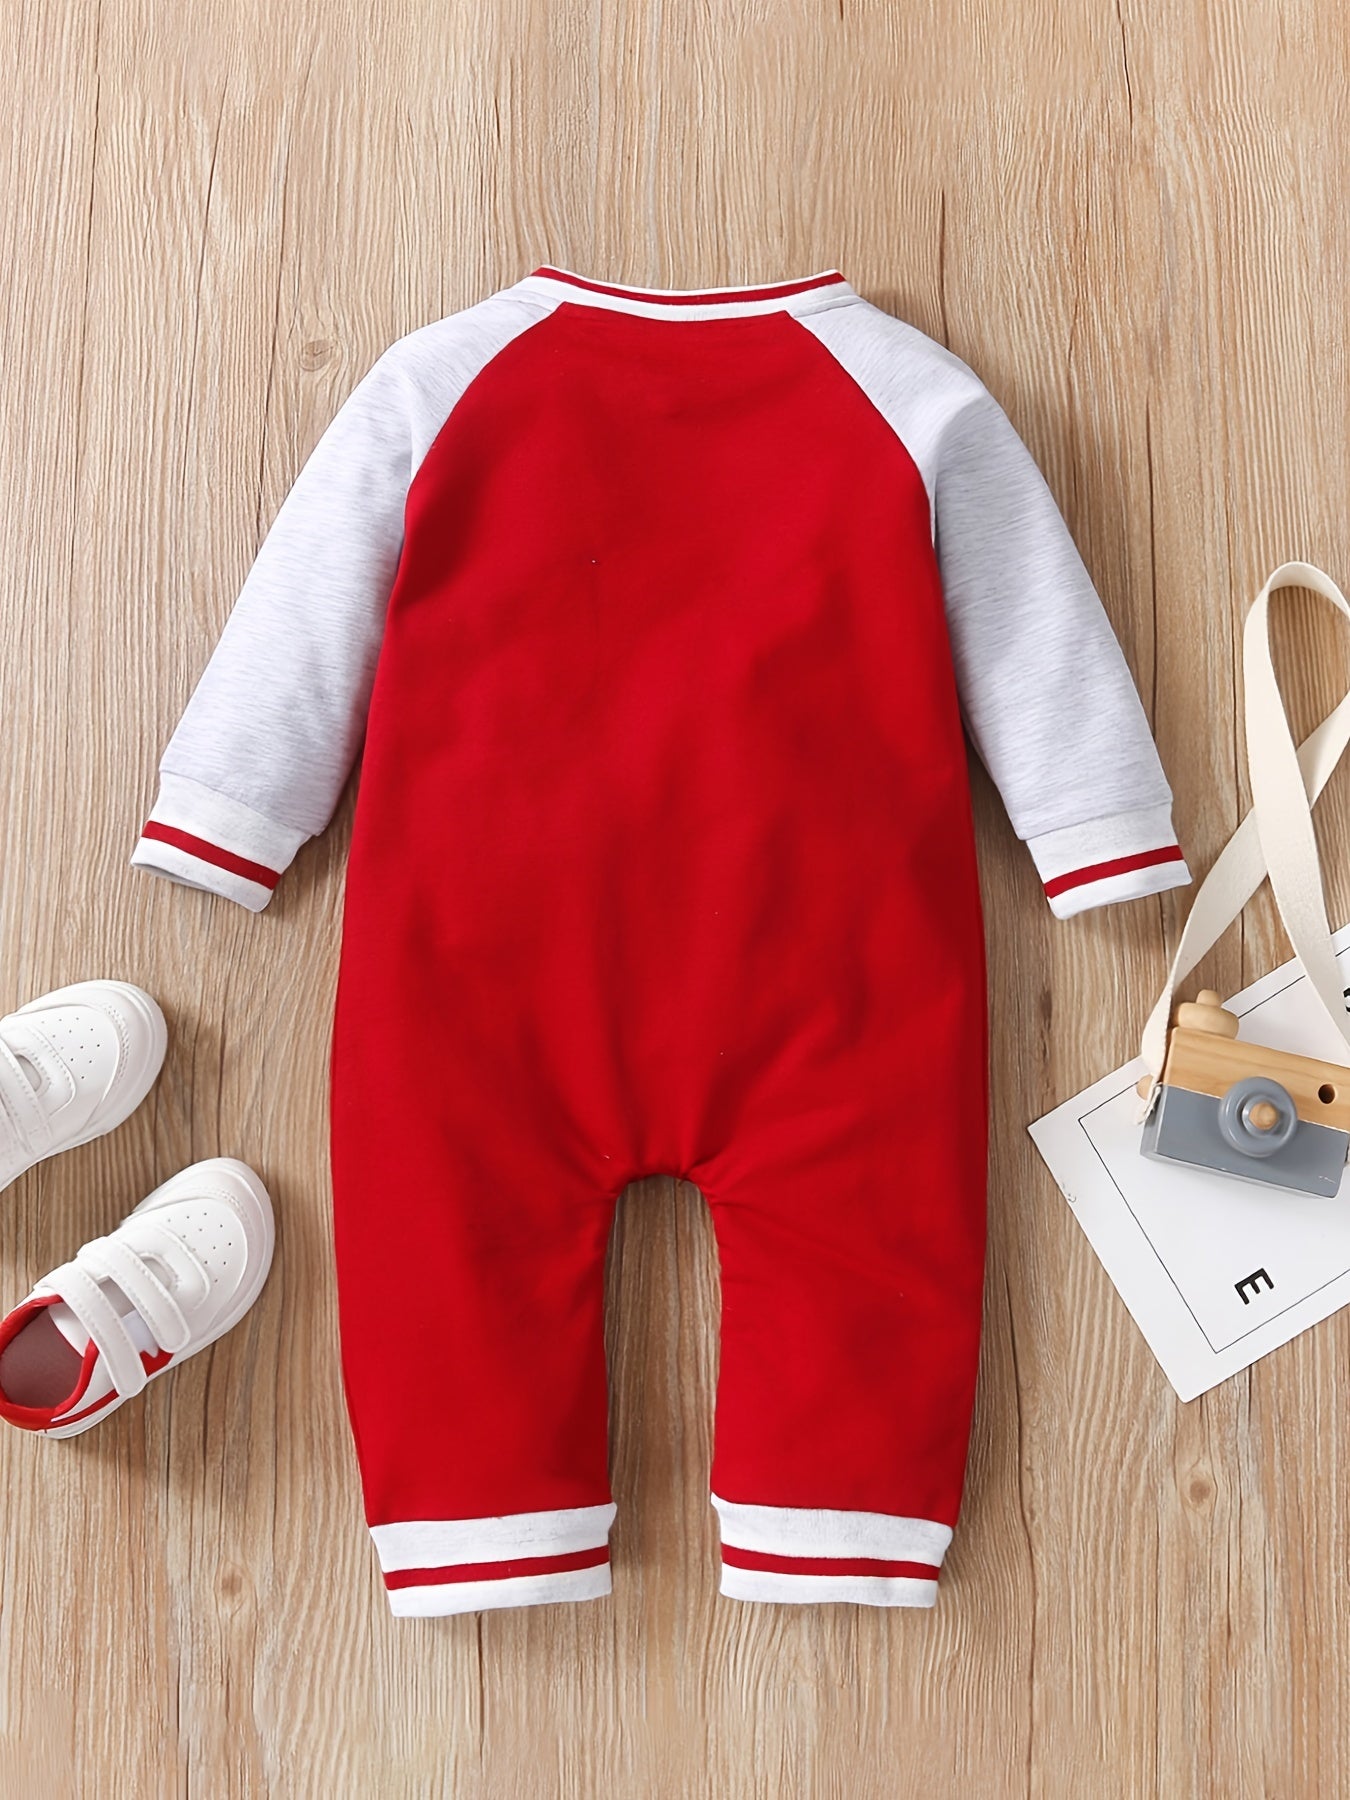 Baby Boys Cute Thermal Romper With "BABYBOSS" Print For Winter Party, Red